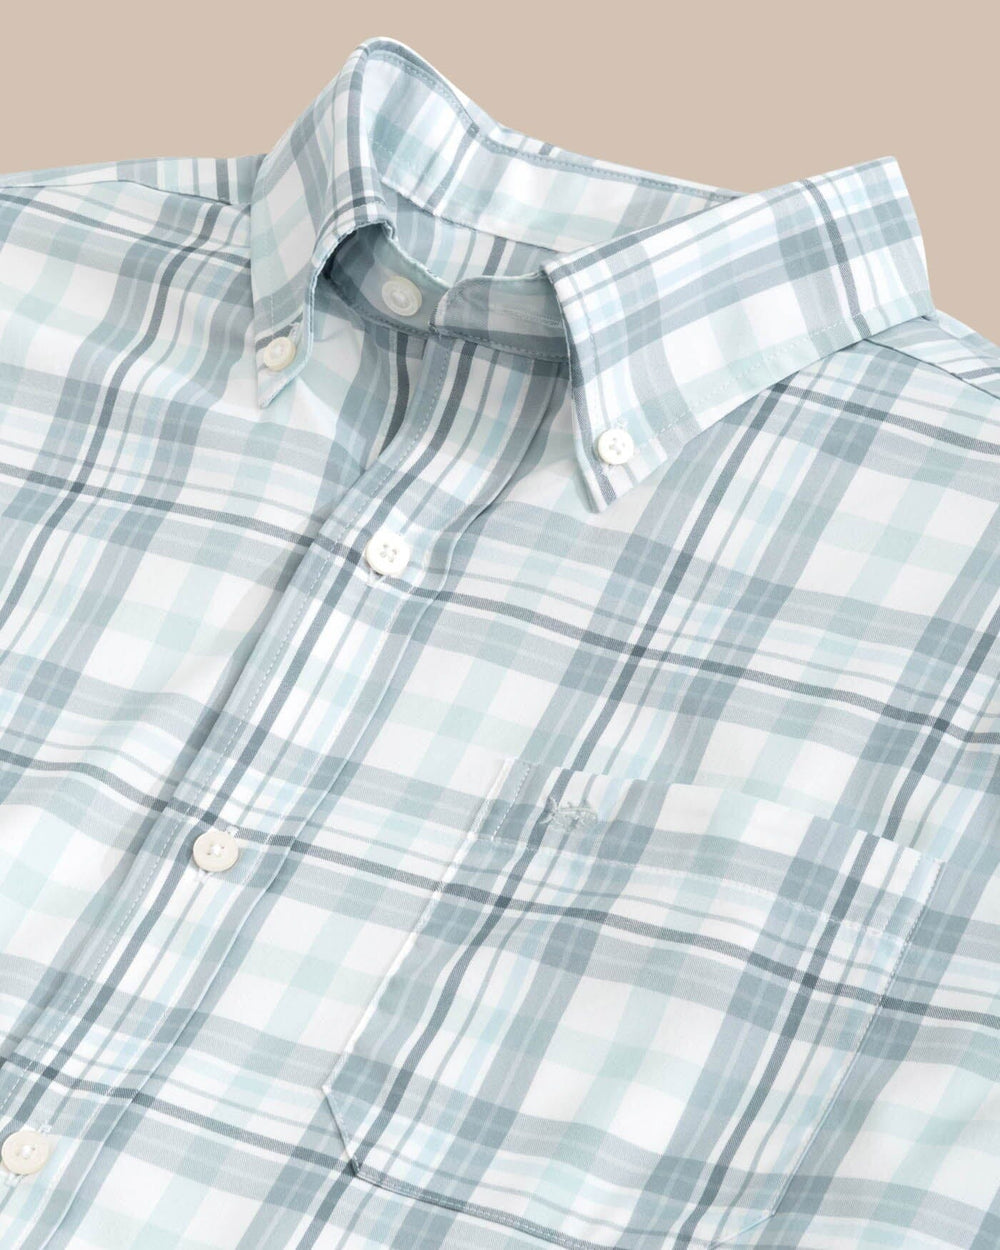 The detail view of the Southern Tide Durwood Plaid Intercoastal Sport Shirts by Southern Tide - Summer Aqua